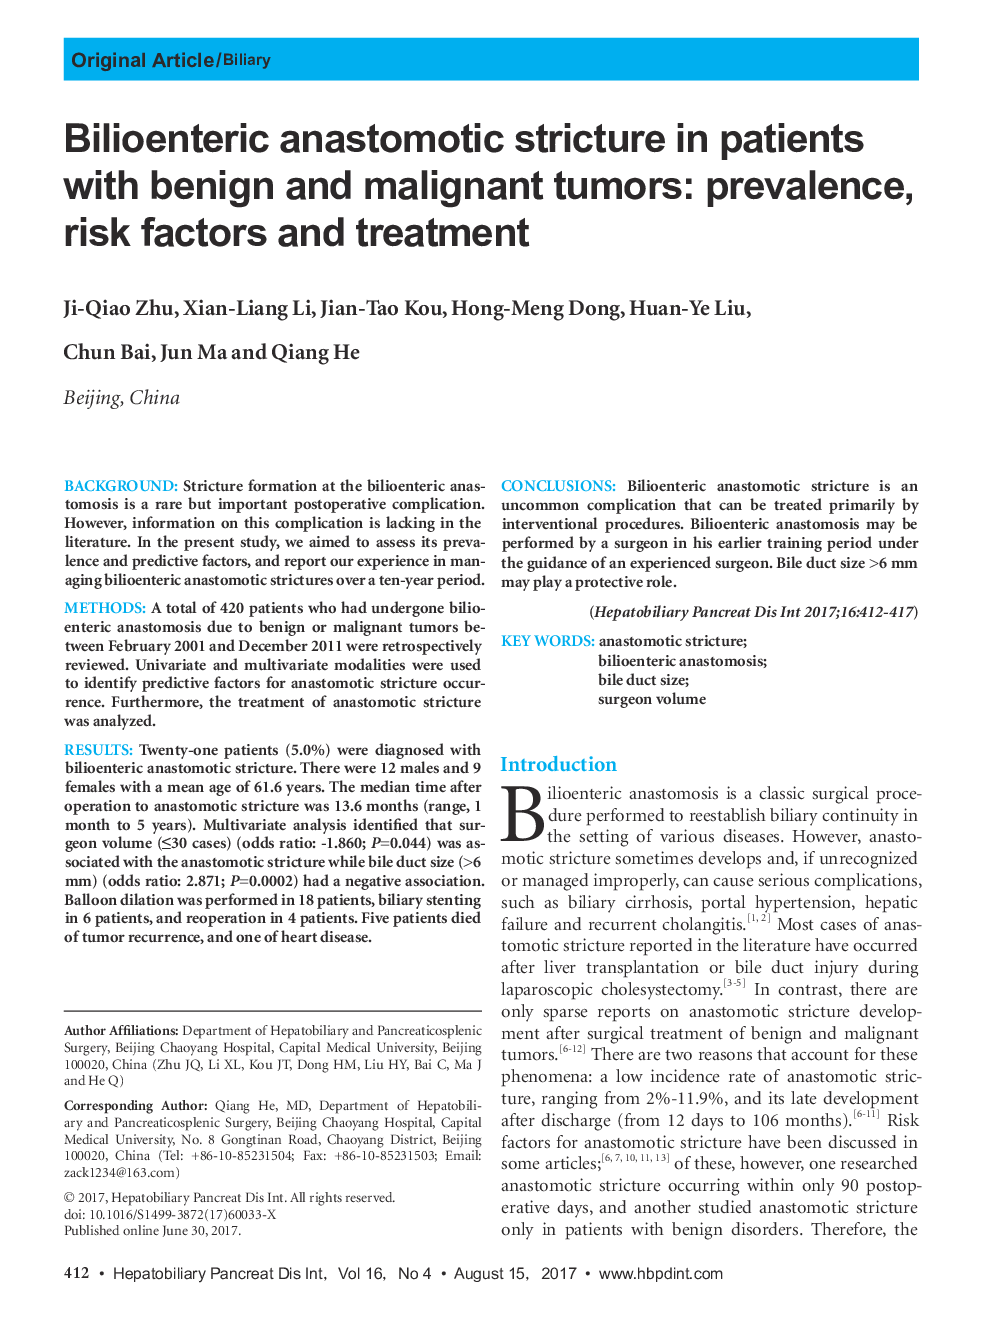 Bilioenteric anastomotic stricture in patients with benign and malignant tumors: prevalence, risk factors and treatment